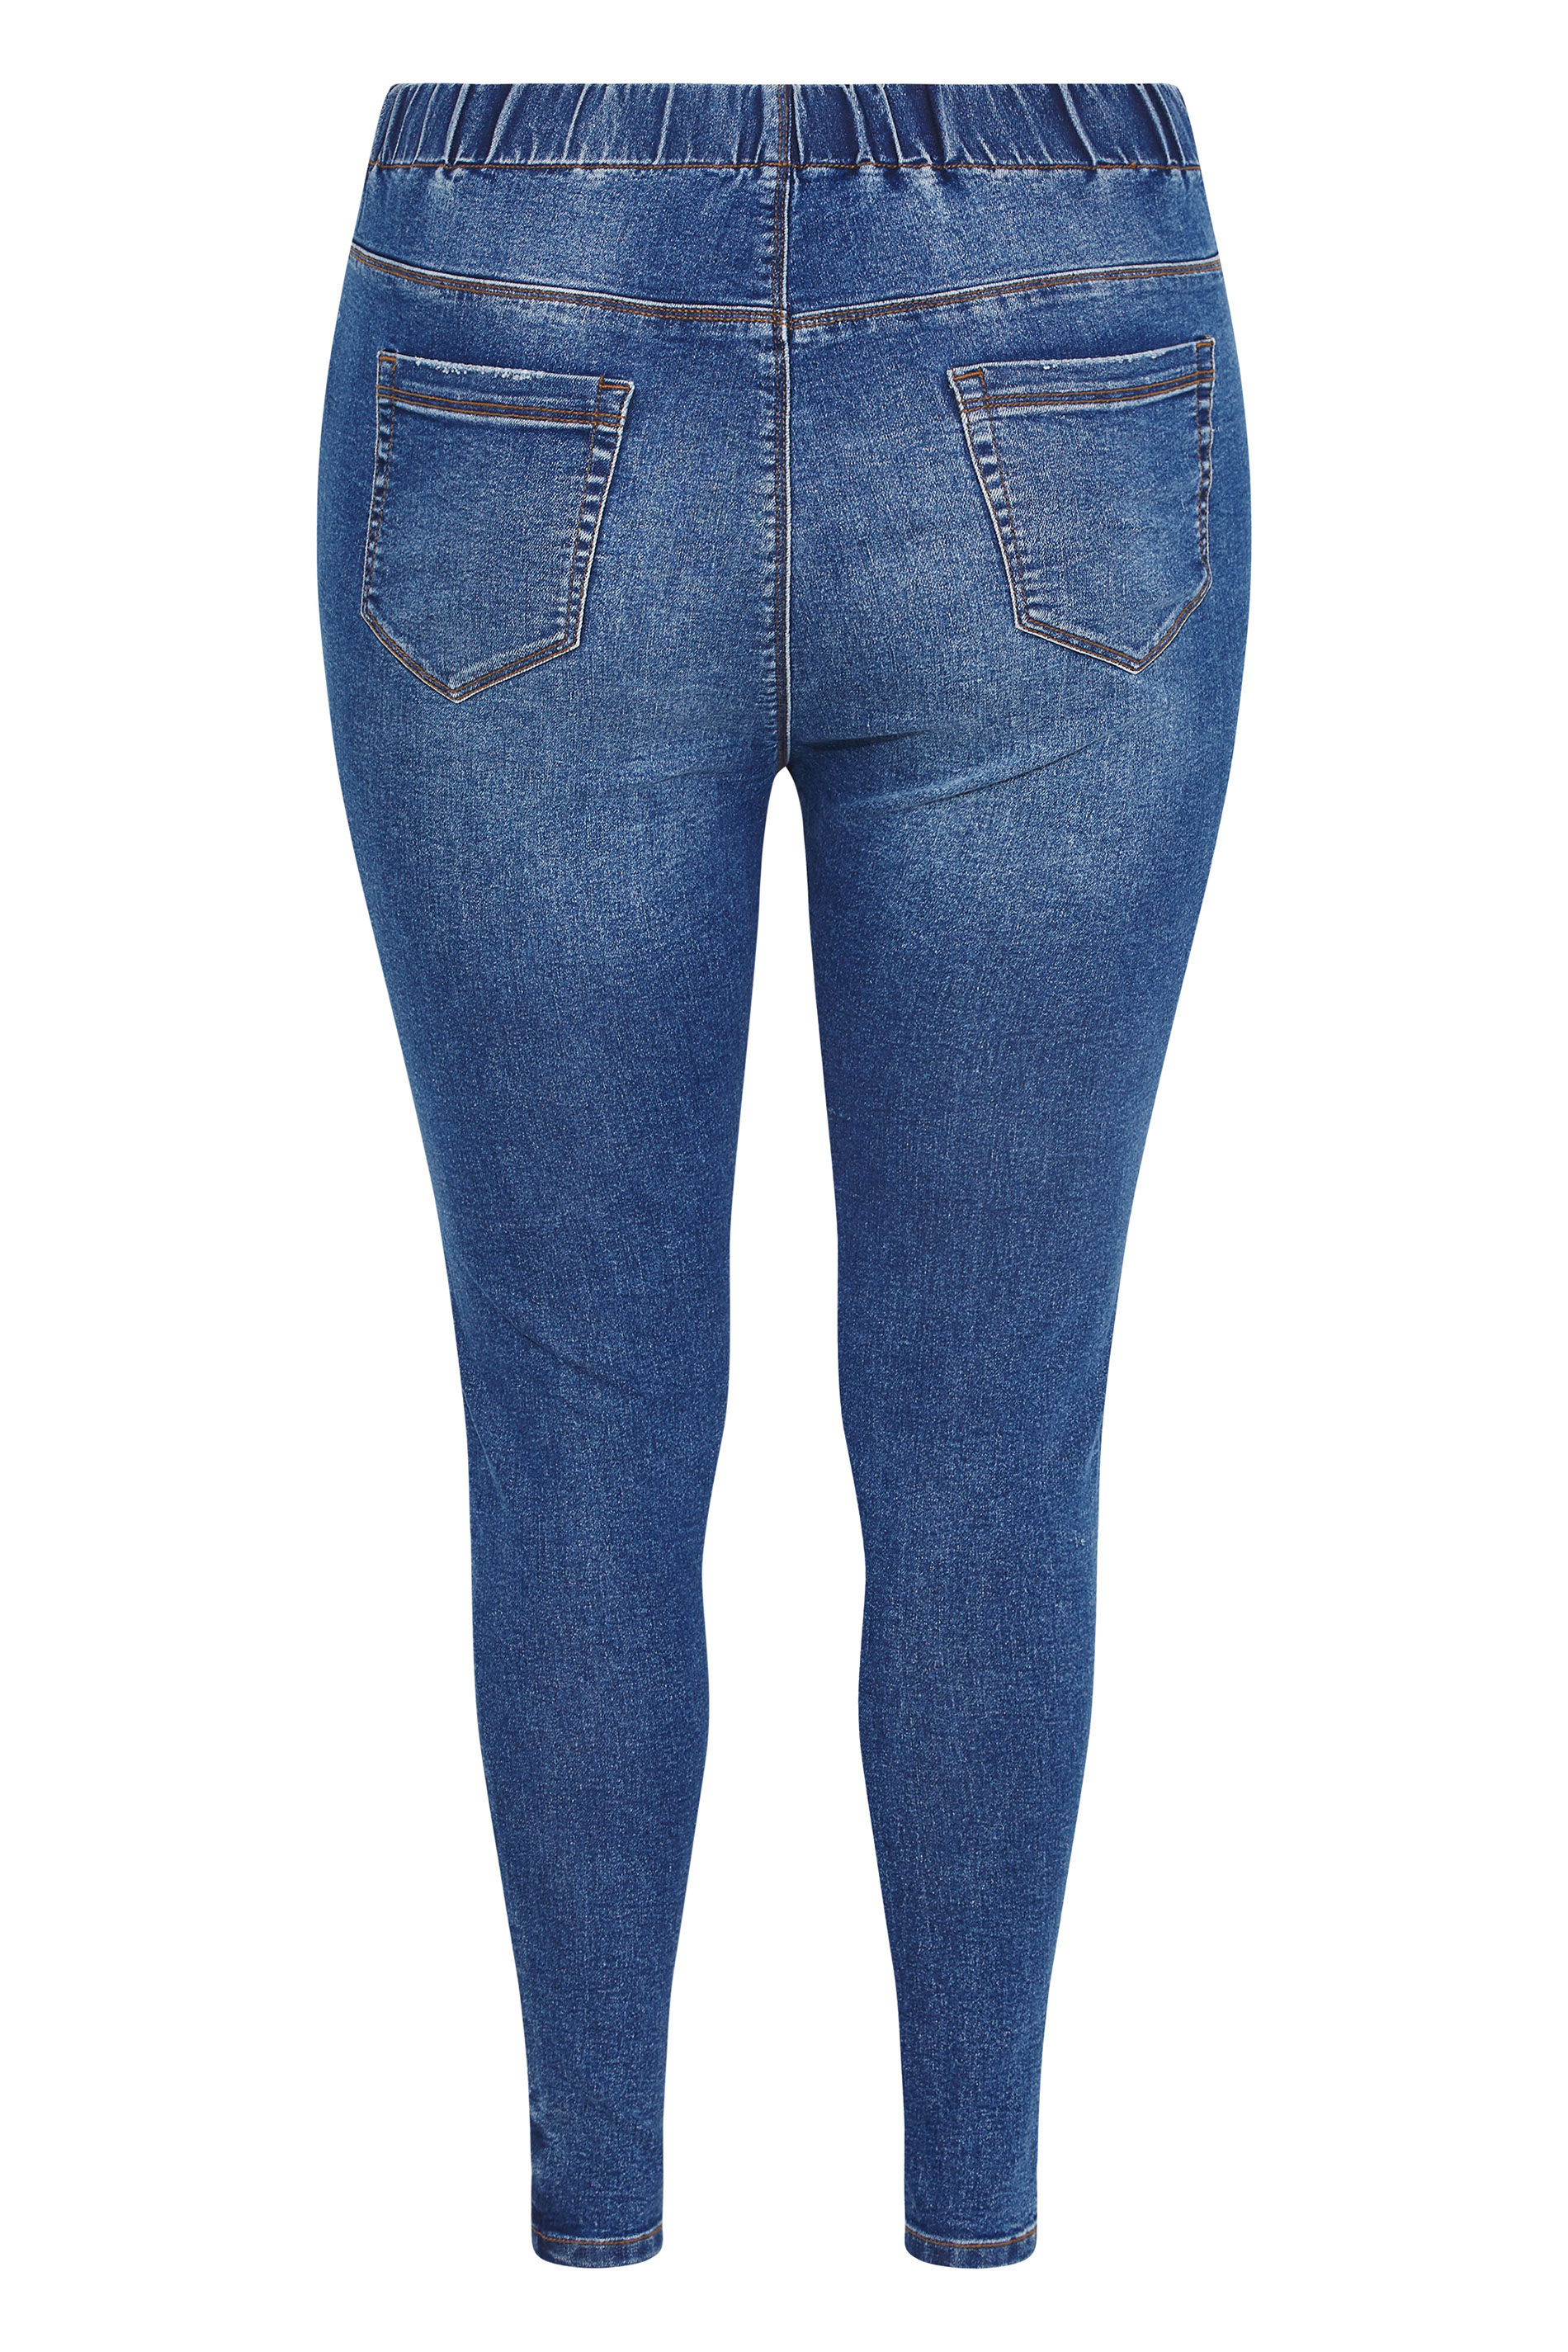 YOURS FOR GOOD Curve Mid Blue Extreme Ripped Stretch JENNY Jeggings